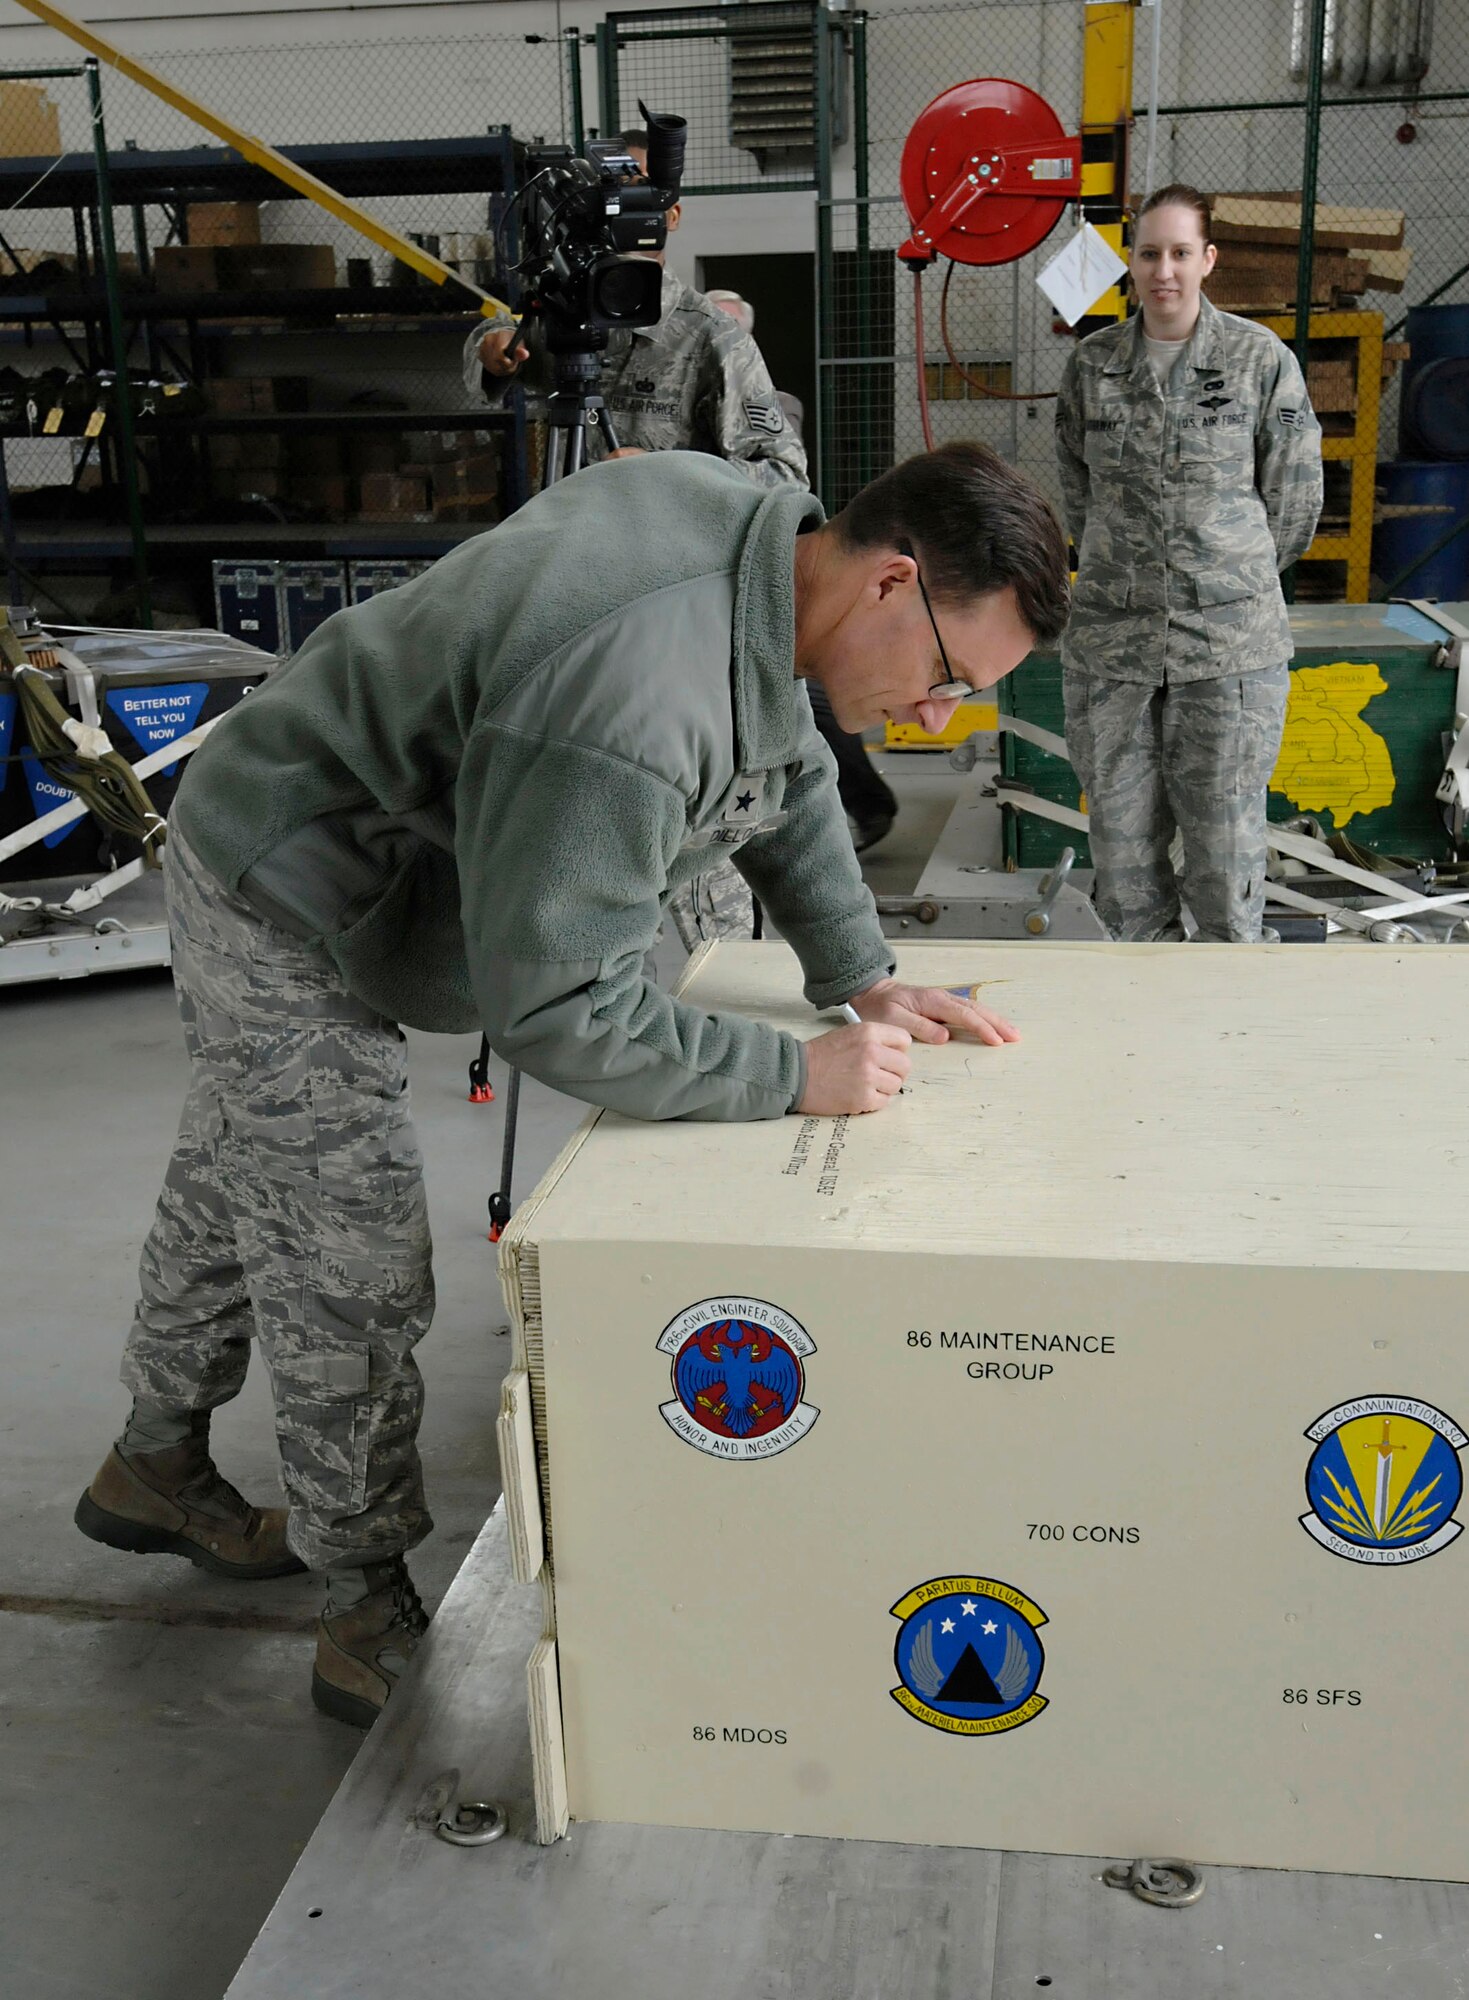 U.S. Air Force Brig. Gen. Mark Dillon, 86th Airlift Wing commander, signs a commemorative heavy training platform designed by Senior Airman Sarah Hathaway, 86th Logistics Readiness Squadron, Ramstein Air Base, Germany, April 4, 2011. The platform will be used to assist in training the 37th Airlift Squadron with heavy equipment airdrops. (U.S. Air Force photo by Airman Kendra Alba) 